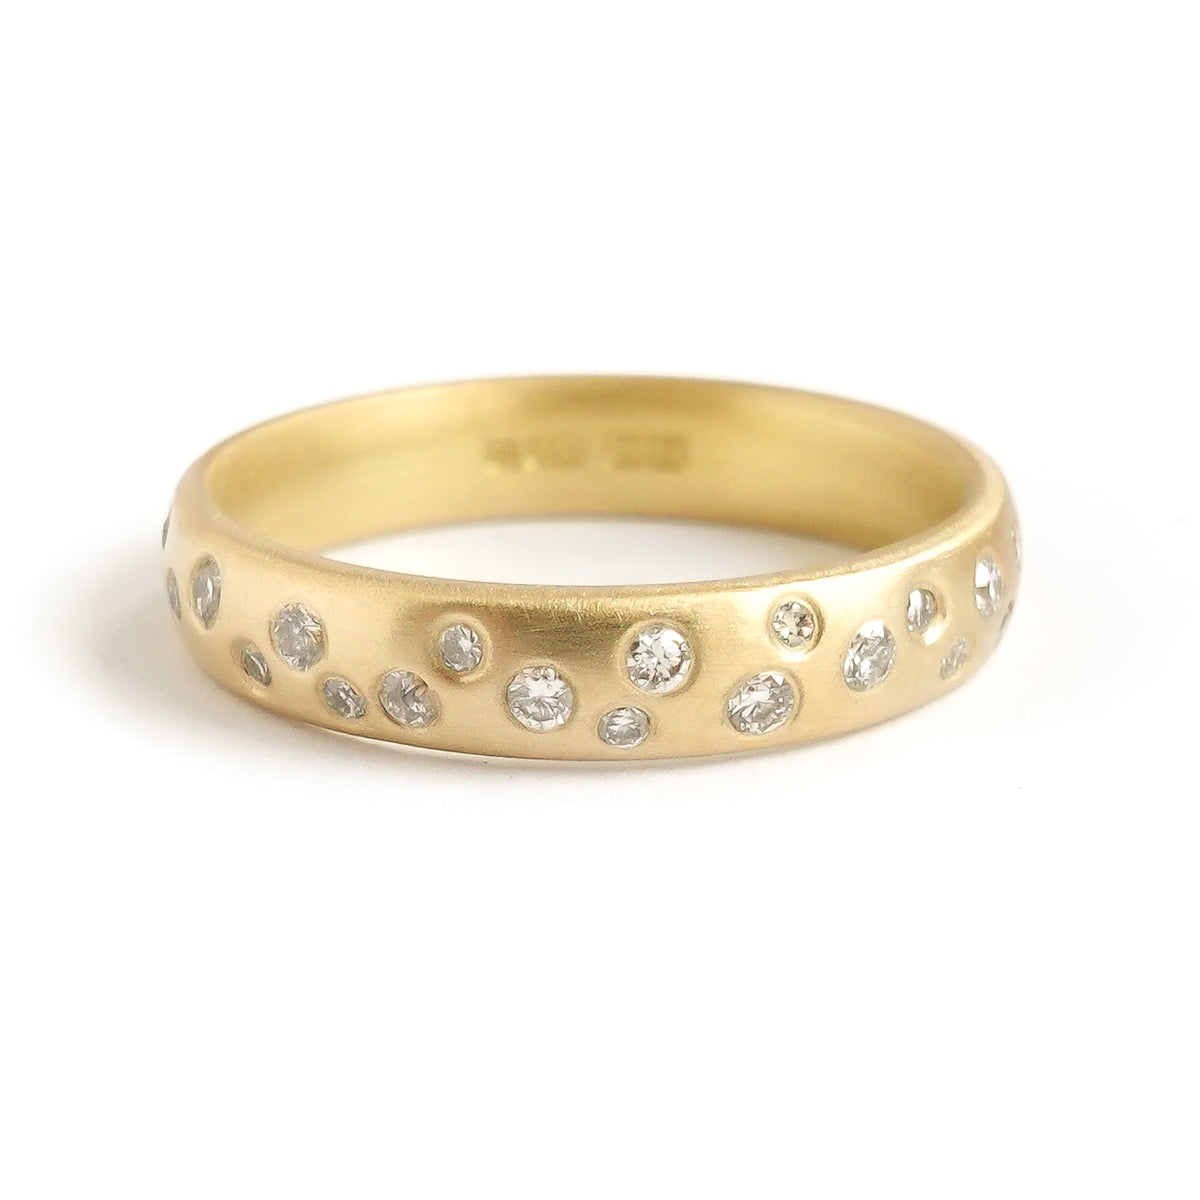 18ct yellow gold and diamond contemporary eternity or wedding band